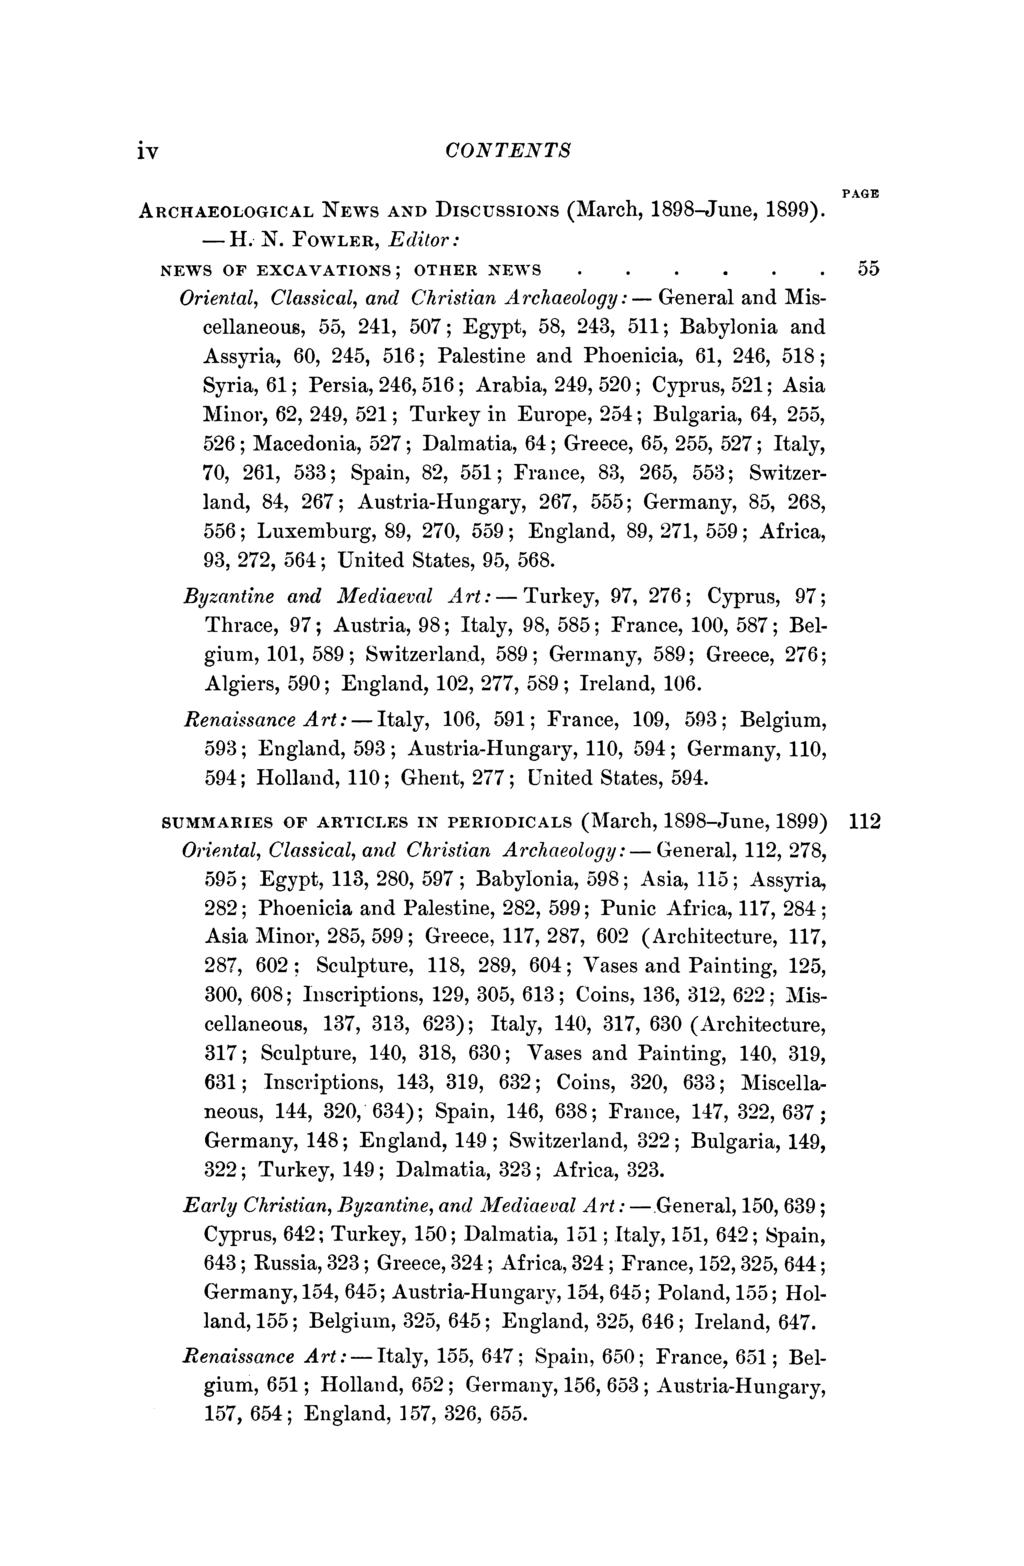 iv CONTENTS ARCHAEOLOGICAL NEWS AND DISCUSSIONS (March, 1898-June, 1899). - H. N. FOWLER, Editor: NEWS OF EXCAVATIONS; OTHER NEWS.